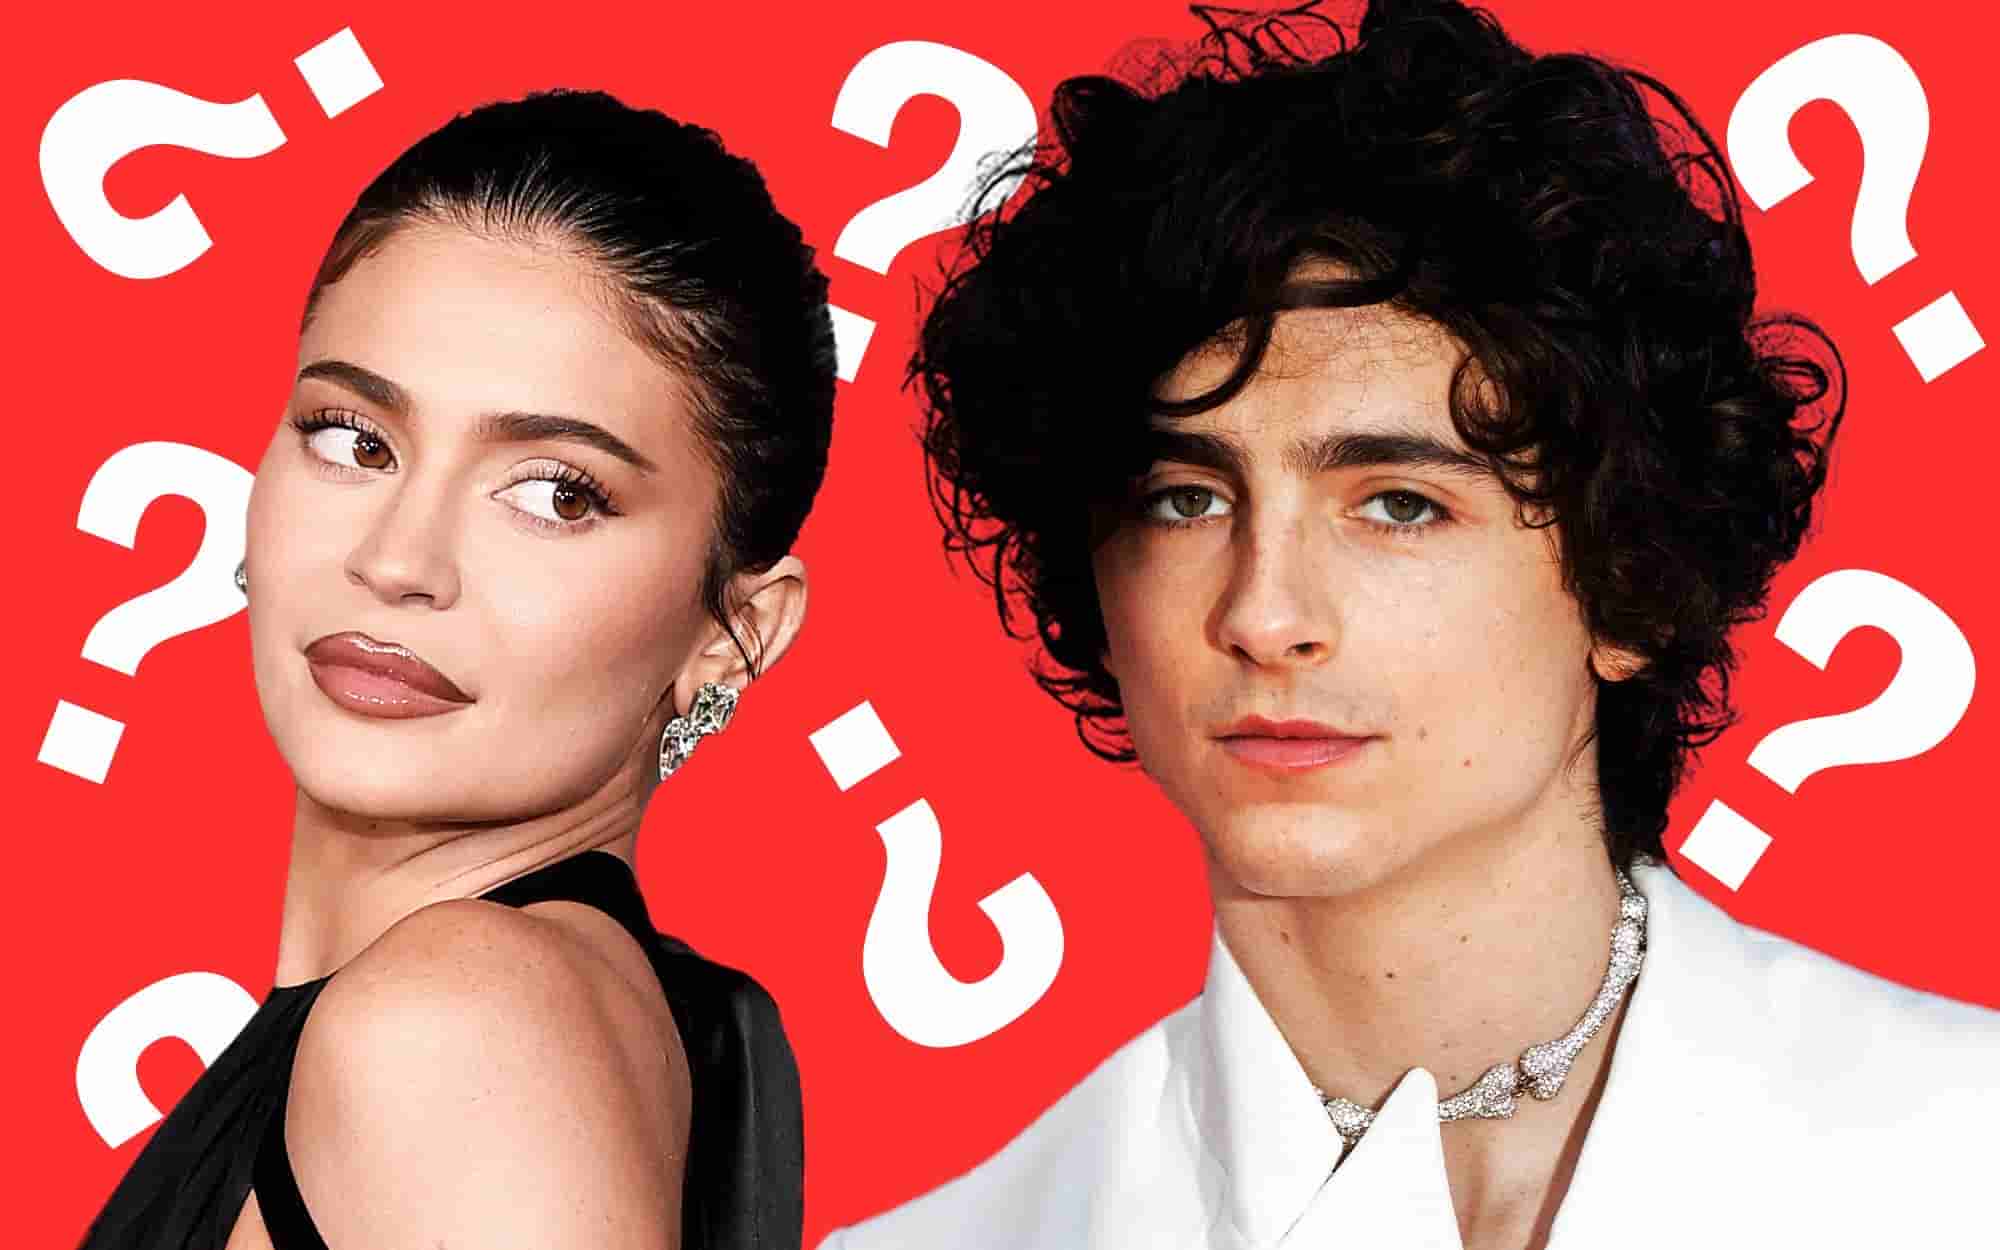 Is it all a sham? Seven questions about Timothée Chalomet and Kylie Jenner’s ‘romance’